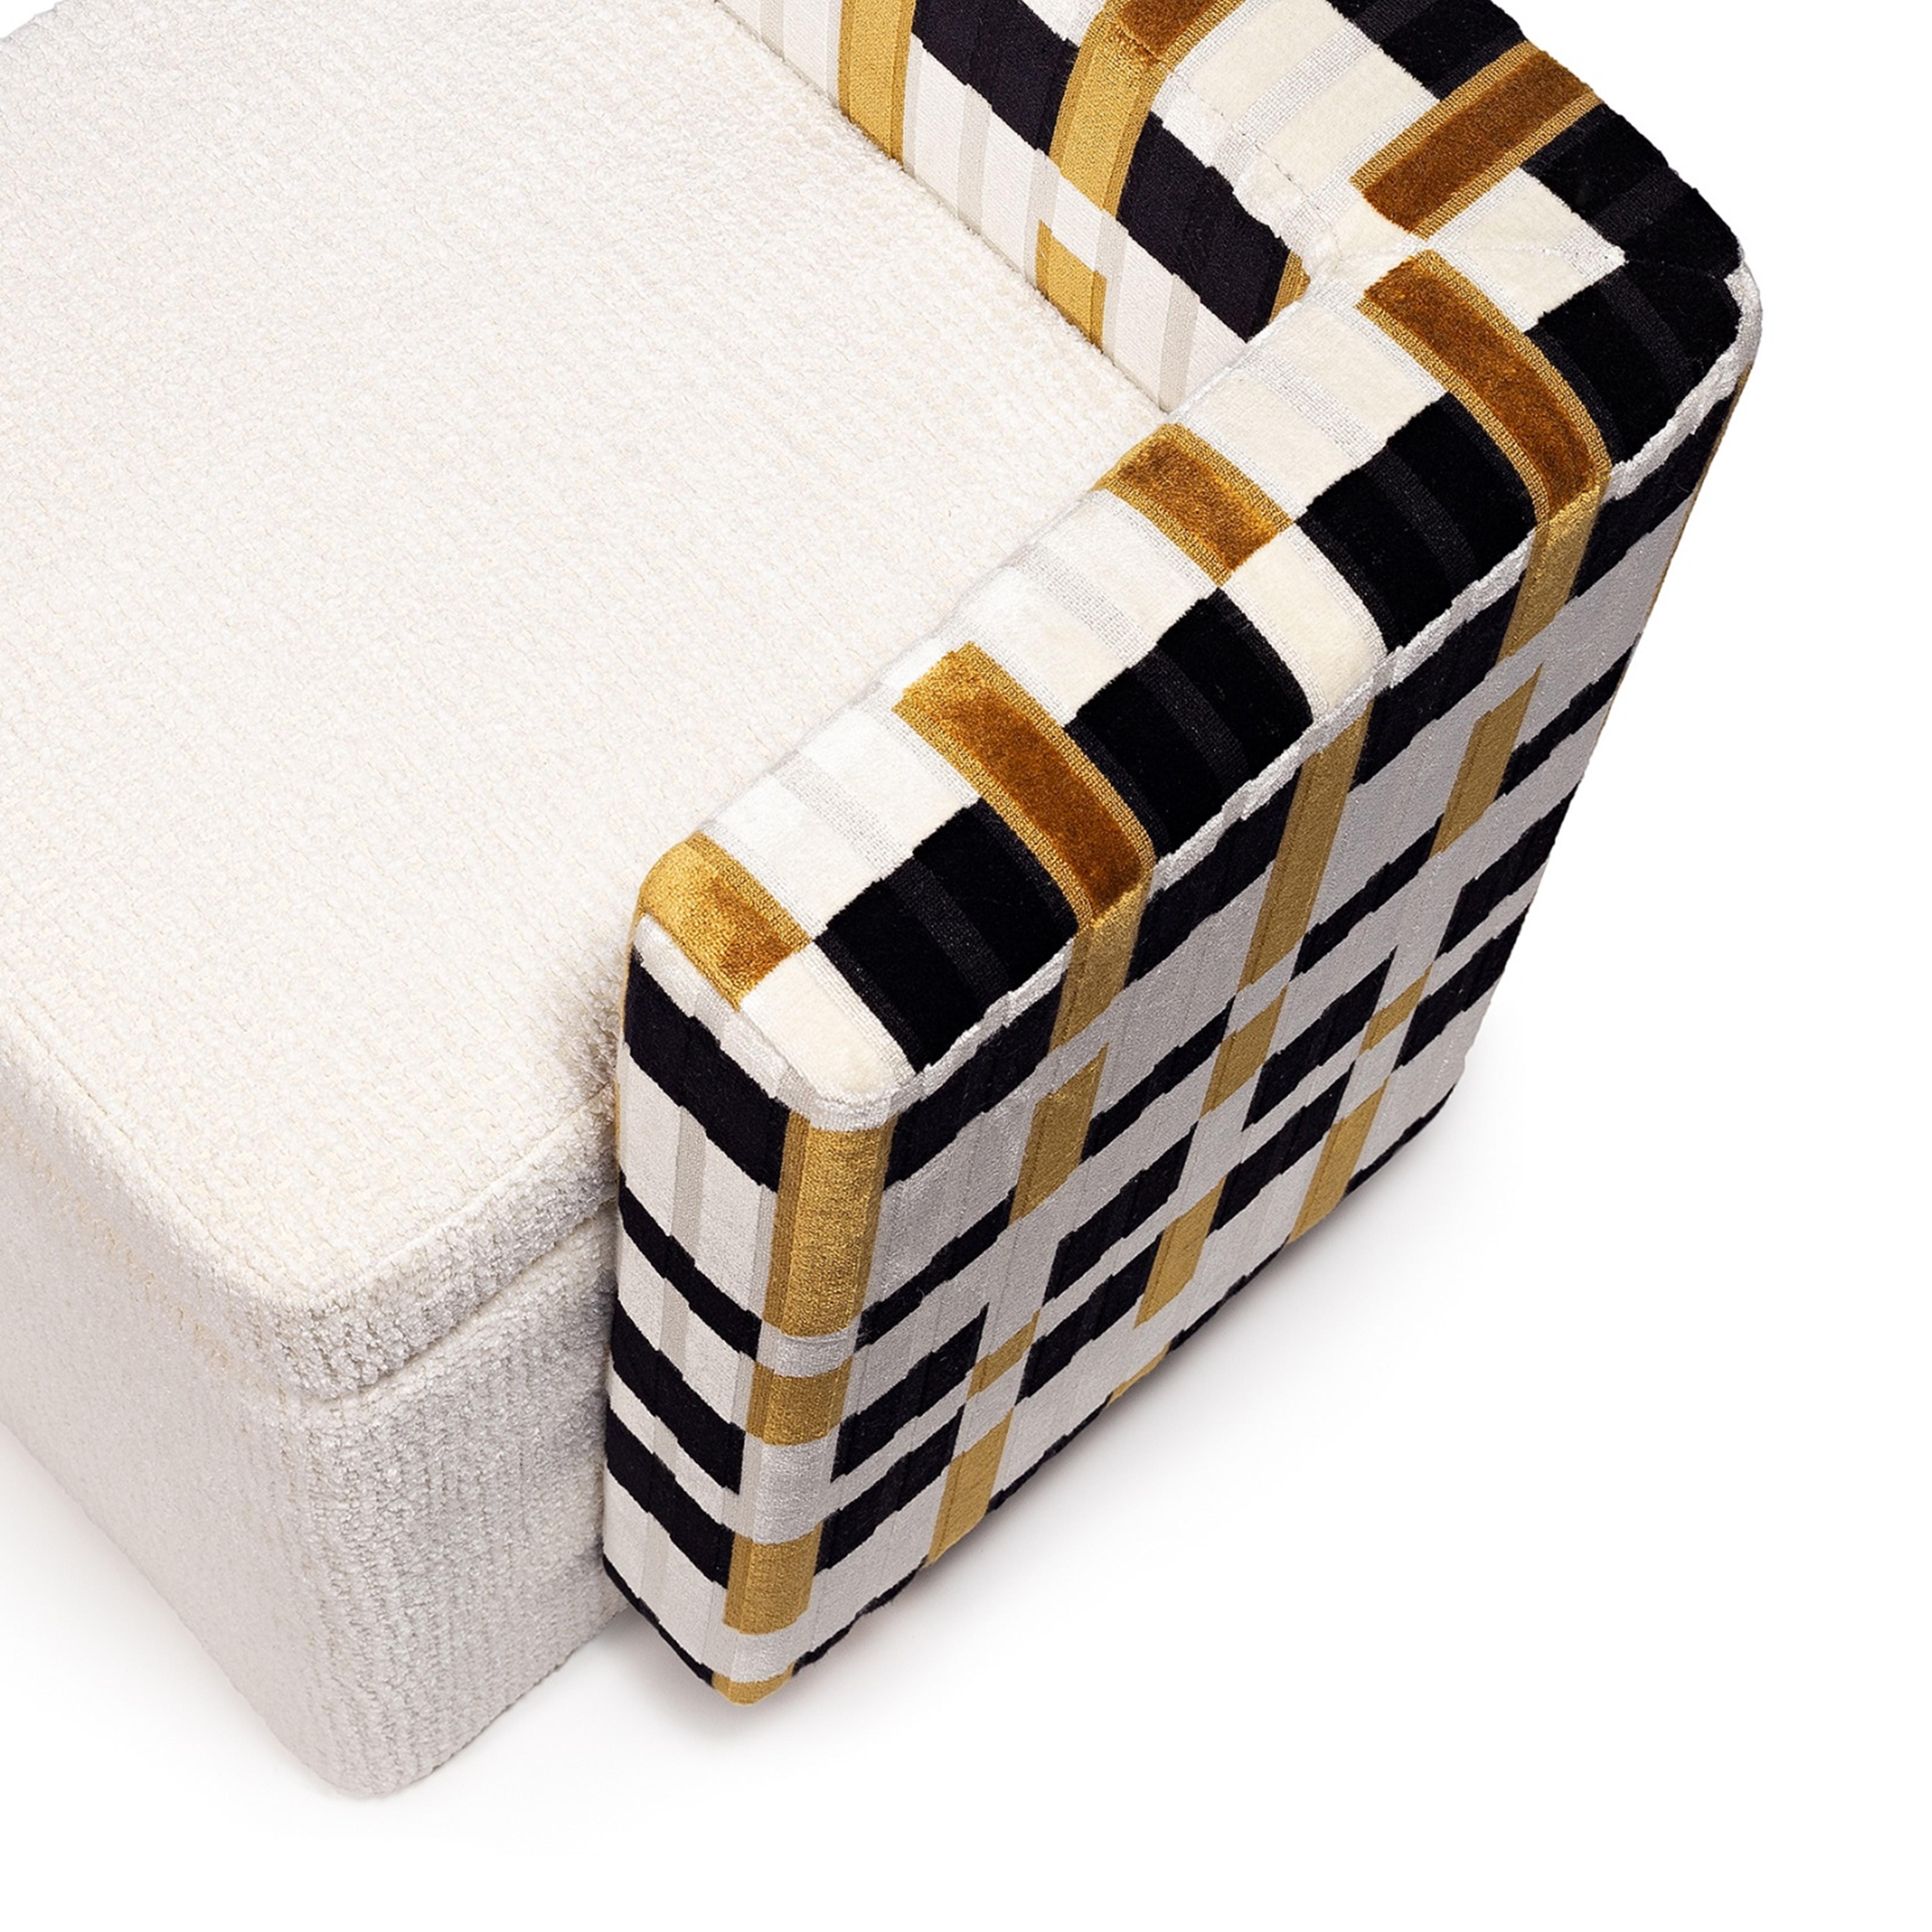 Fabric Not a Cube Stool, InsidherLand by Joana Santos Barbosa For Sale